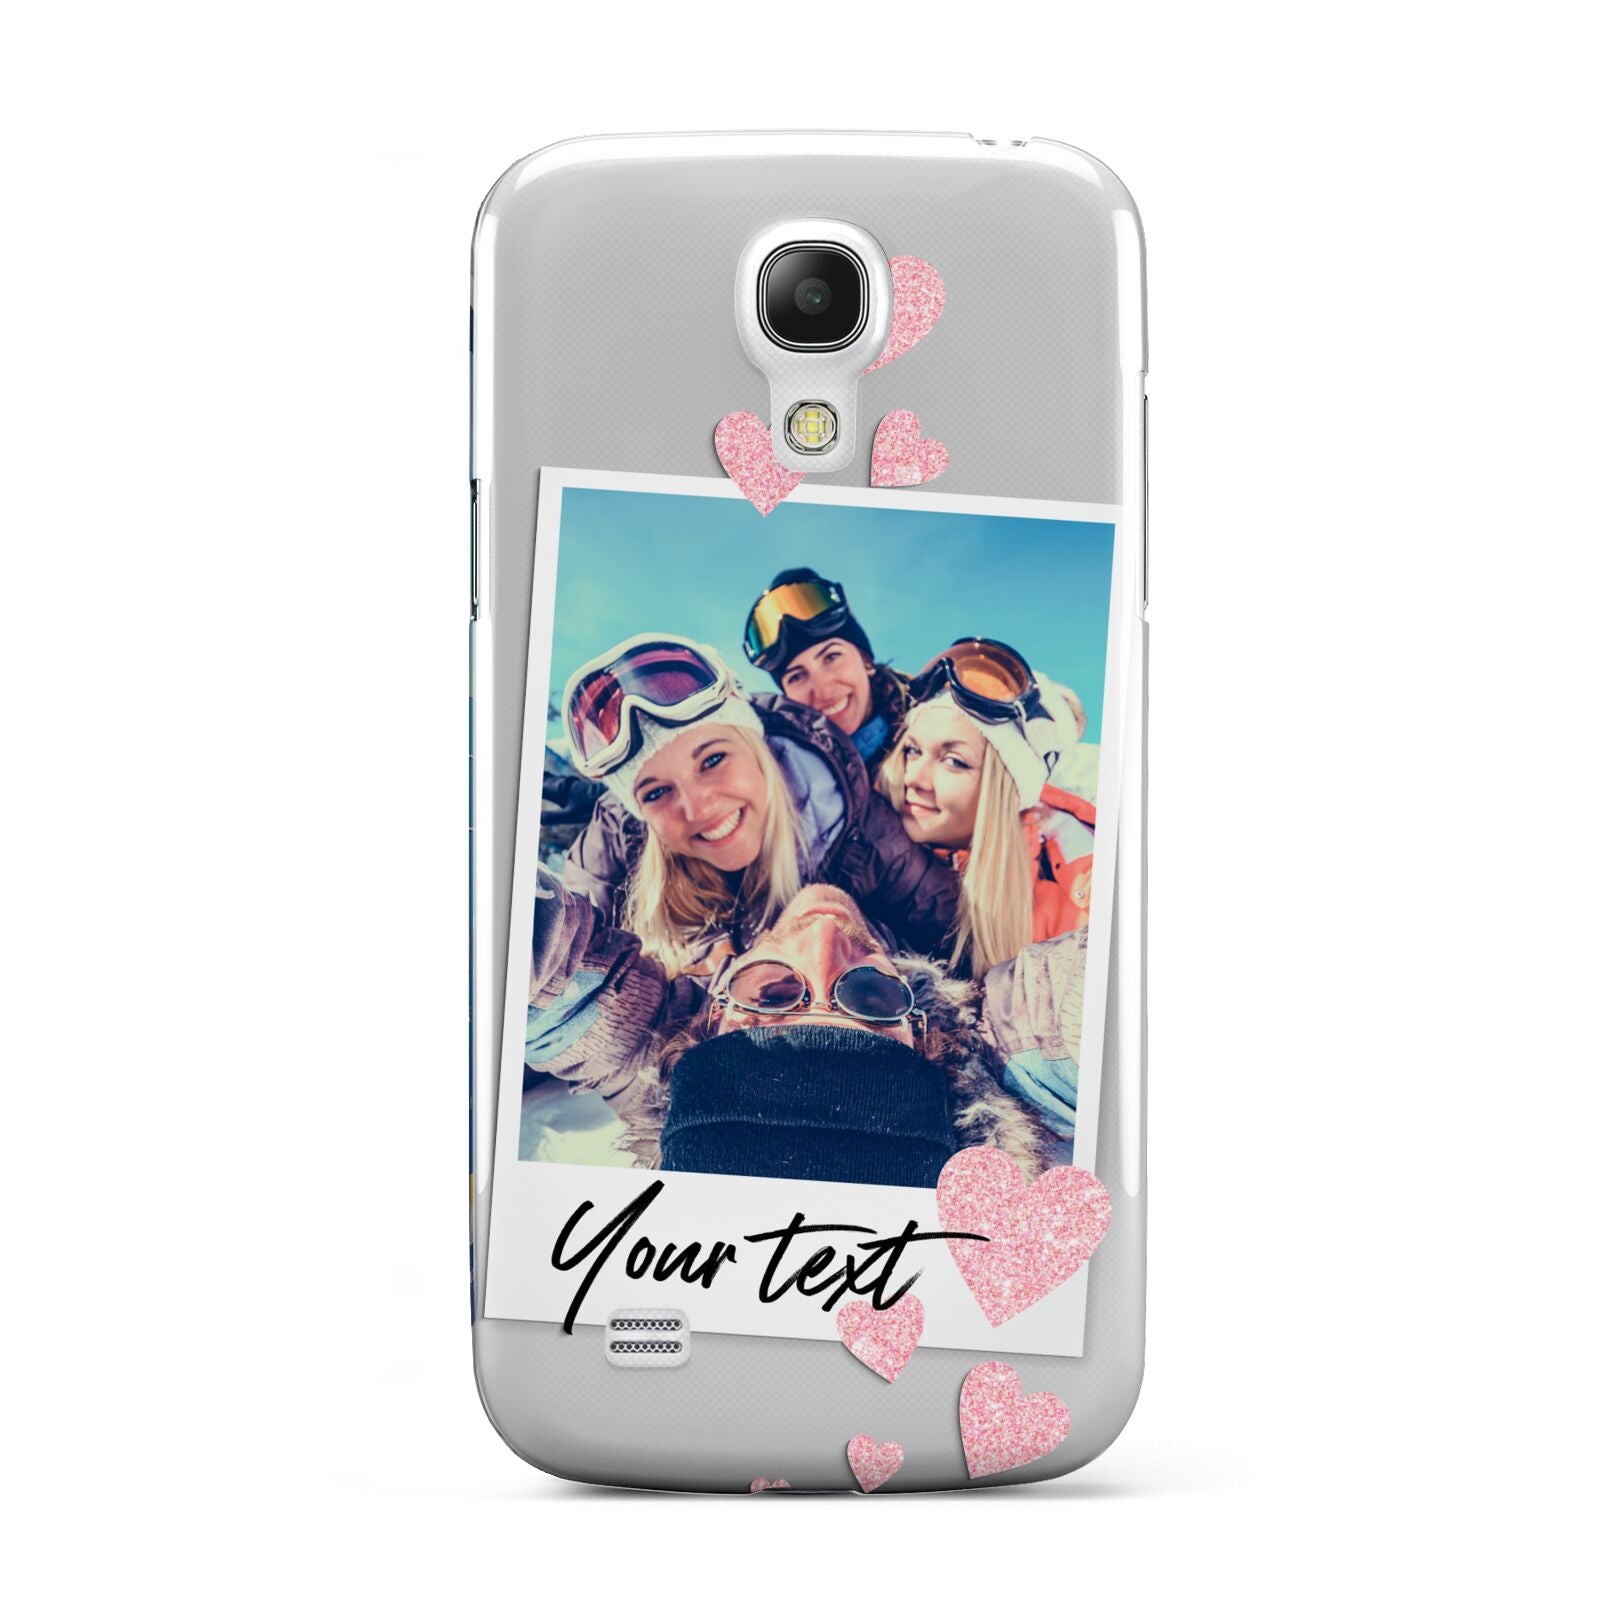 Photo with Text Samsung Galaxy S4 Mini Case